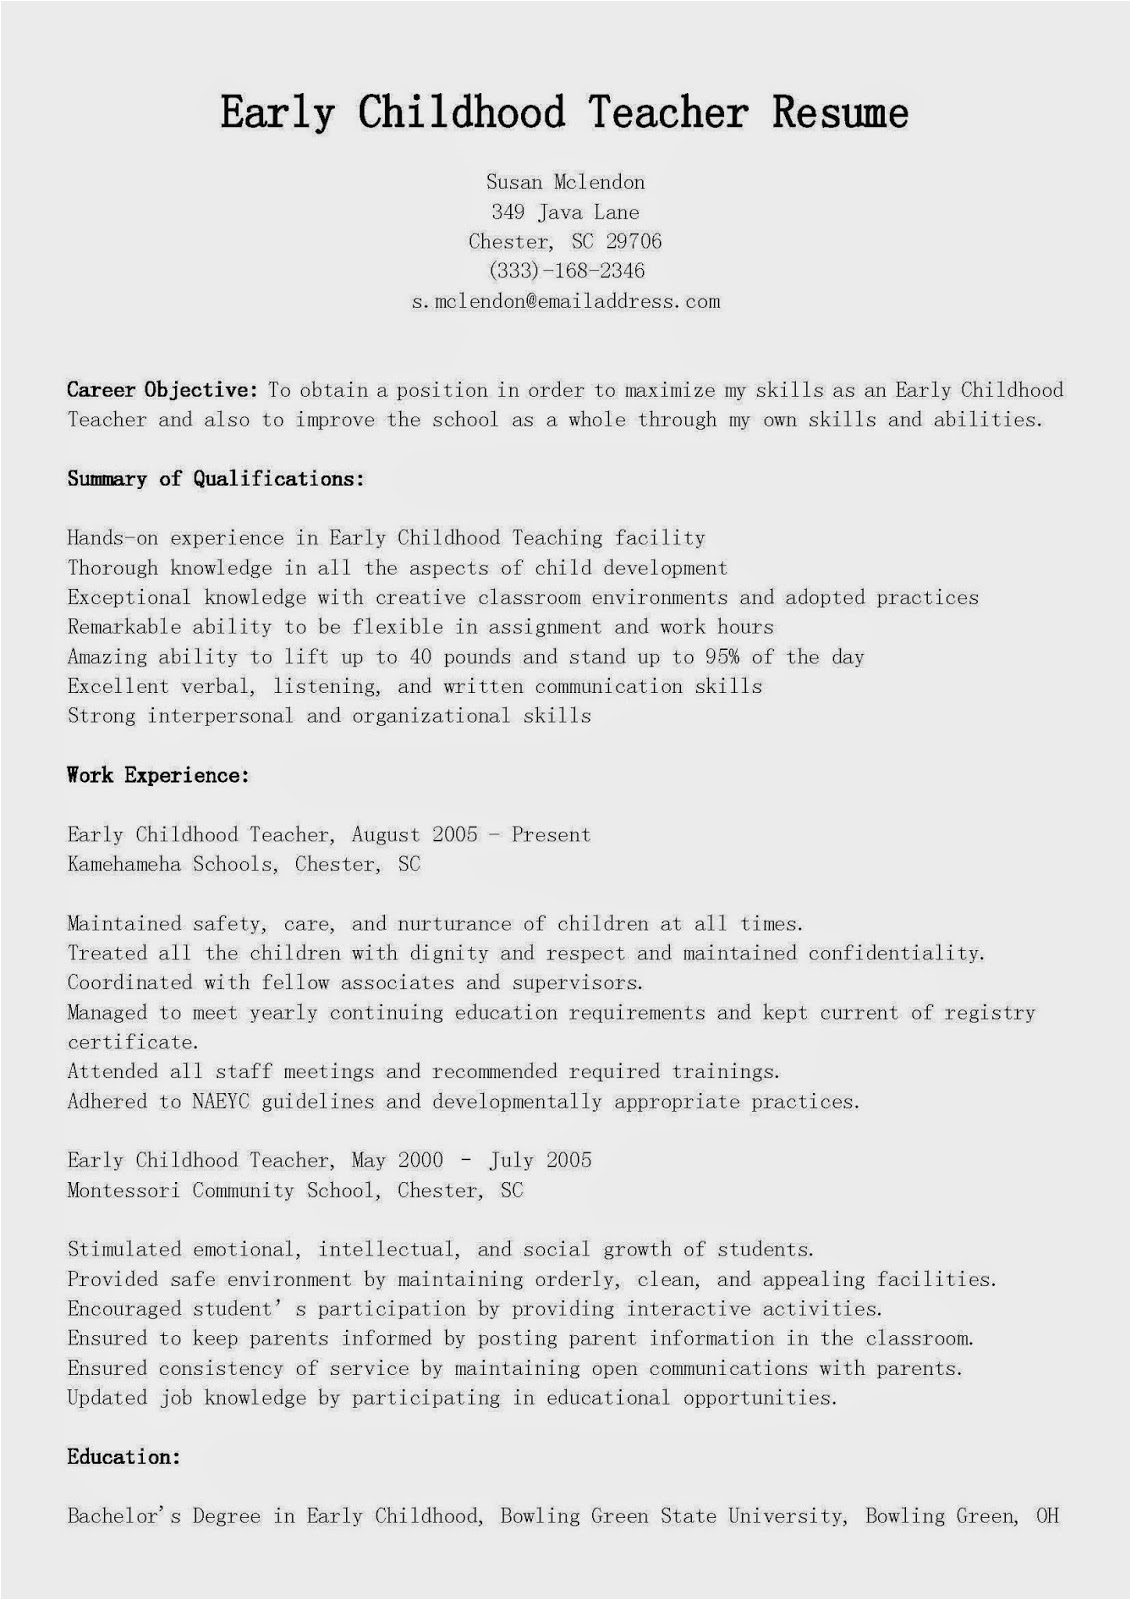 Early Childhood Teacher assistant Resume Sample Resume Samples Early Childhood Teacher Resume Sample